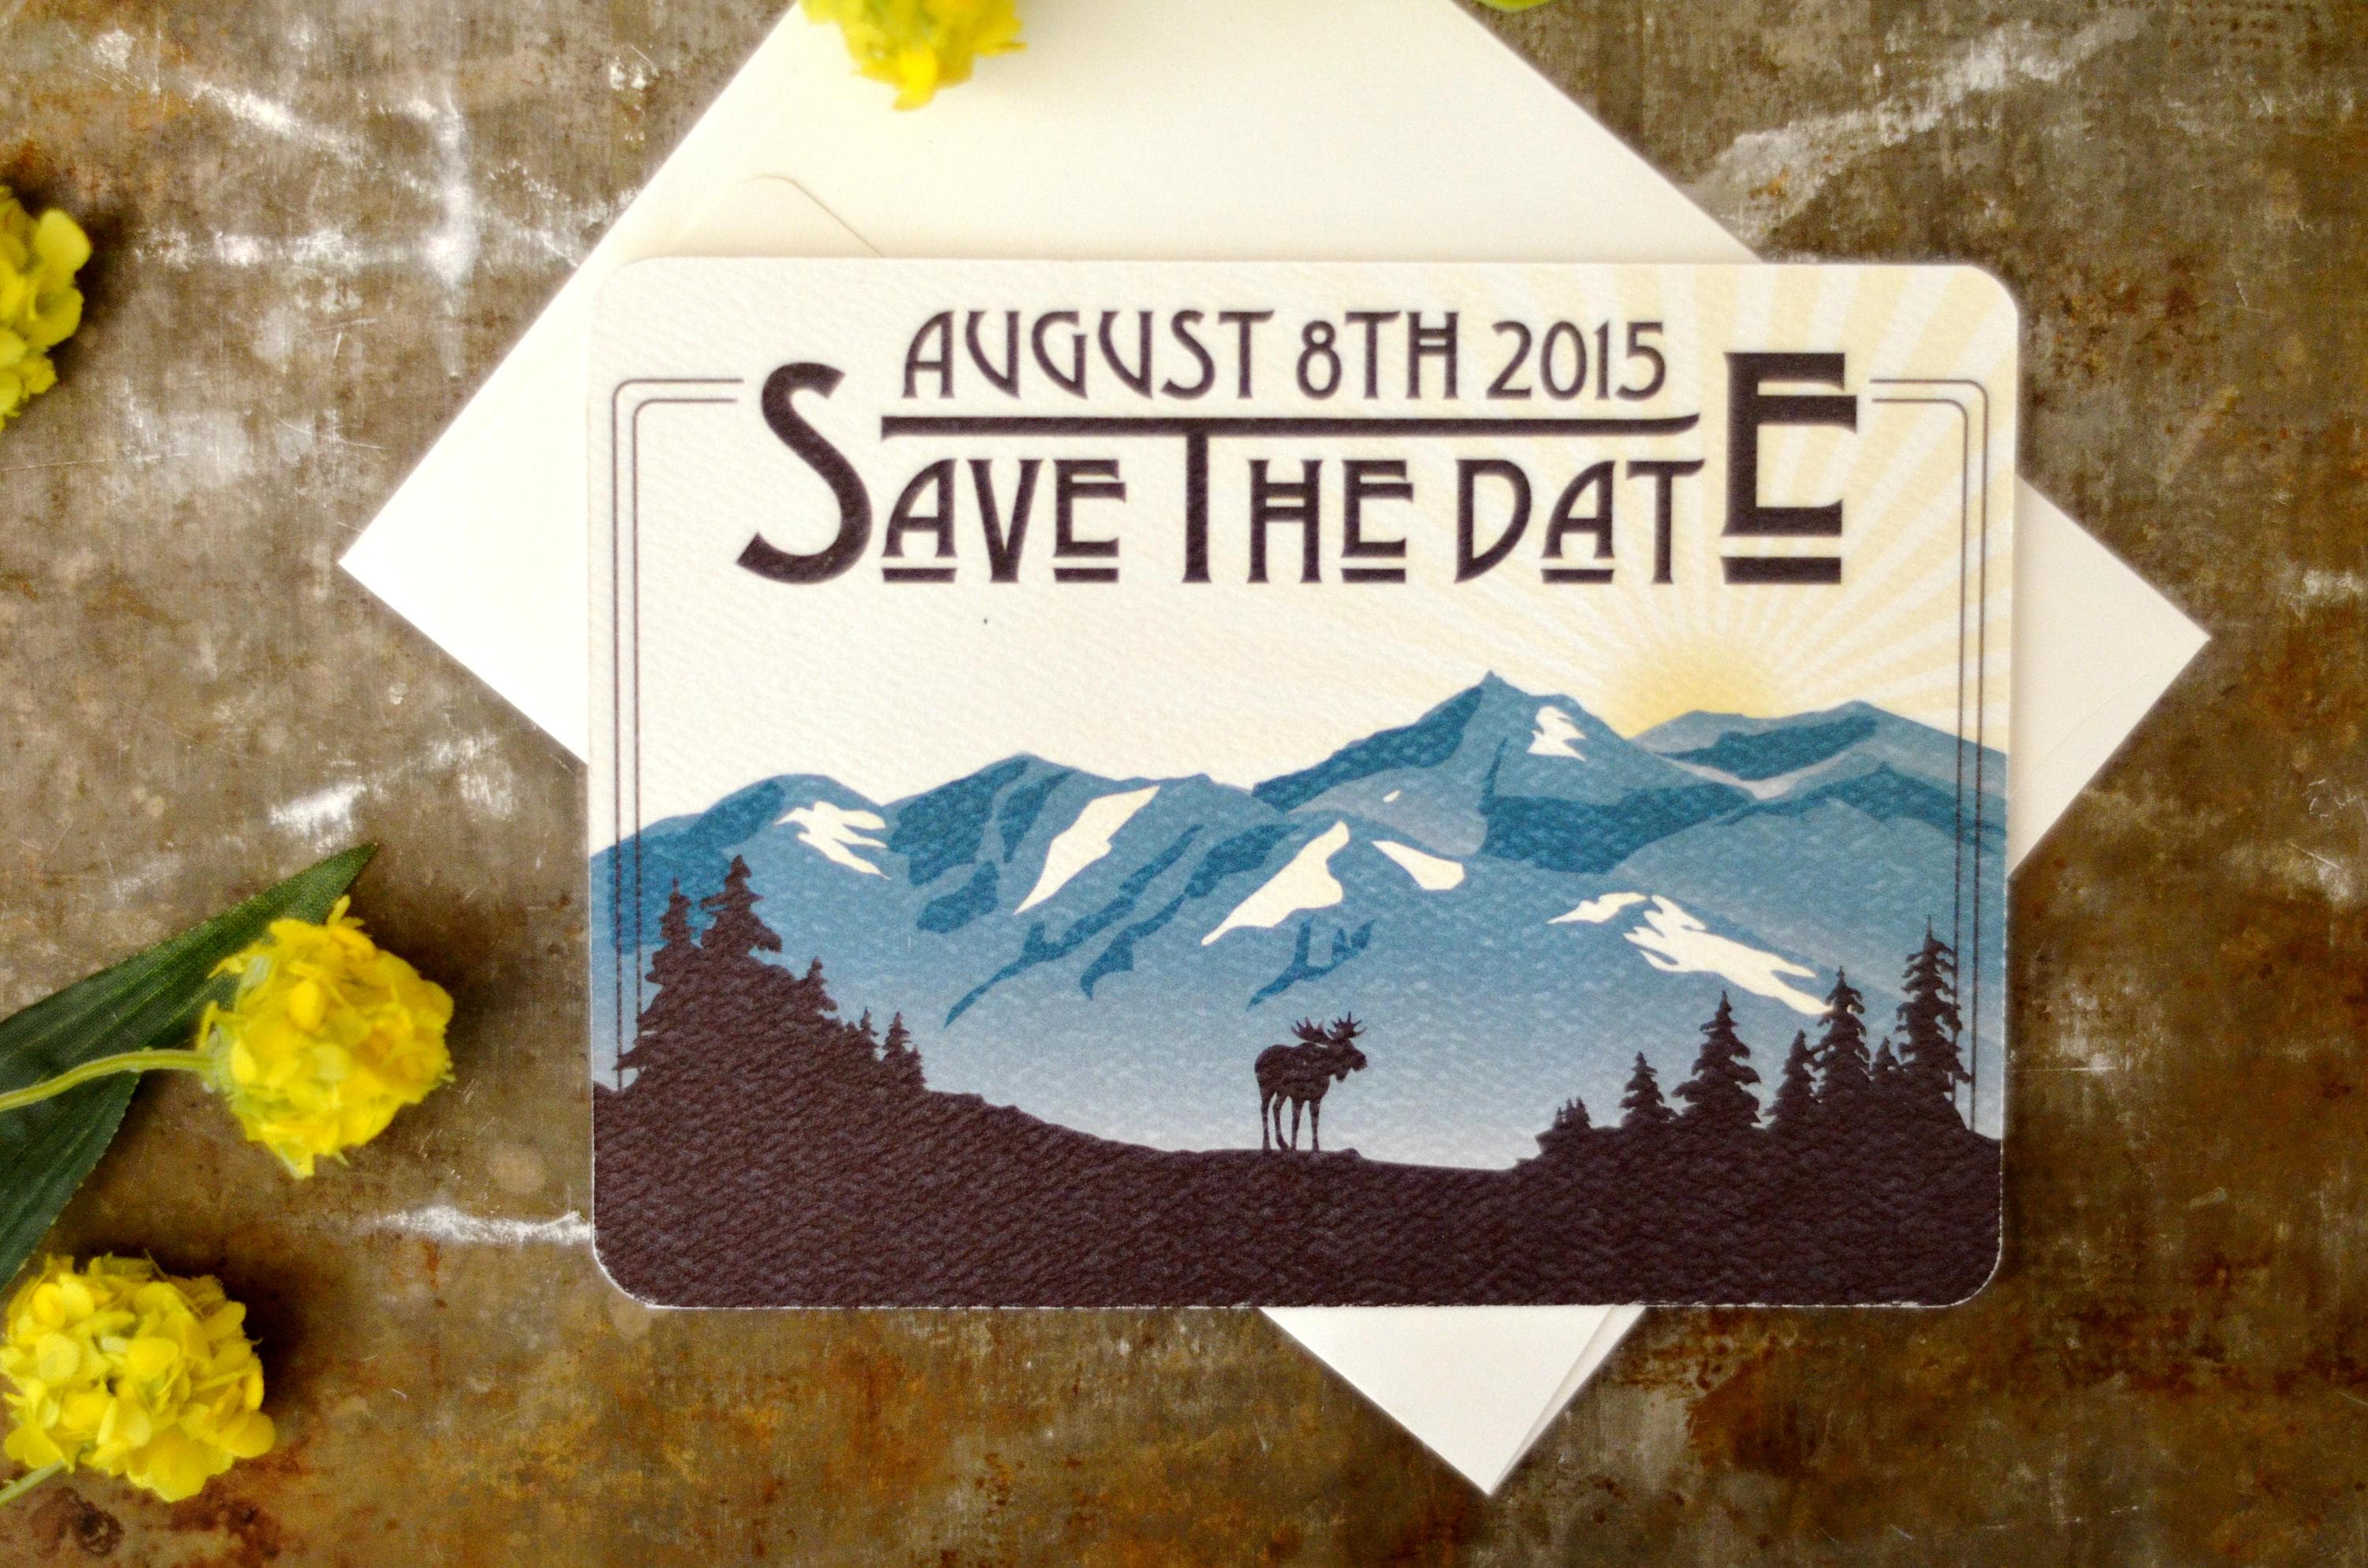 Denali Alaskan Mountains (Yellow & Blue) with Moose Sunrise Save The Date Card with Envelope